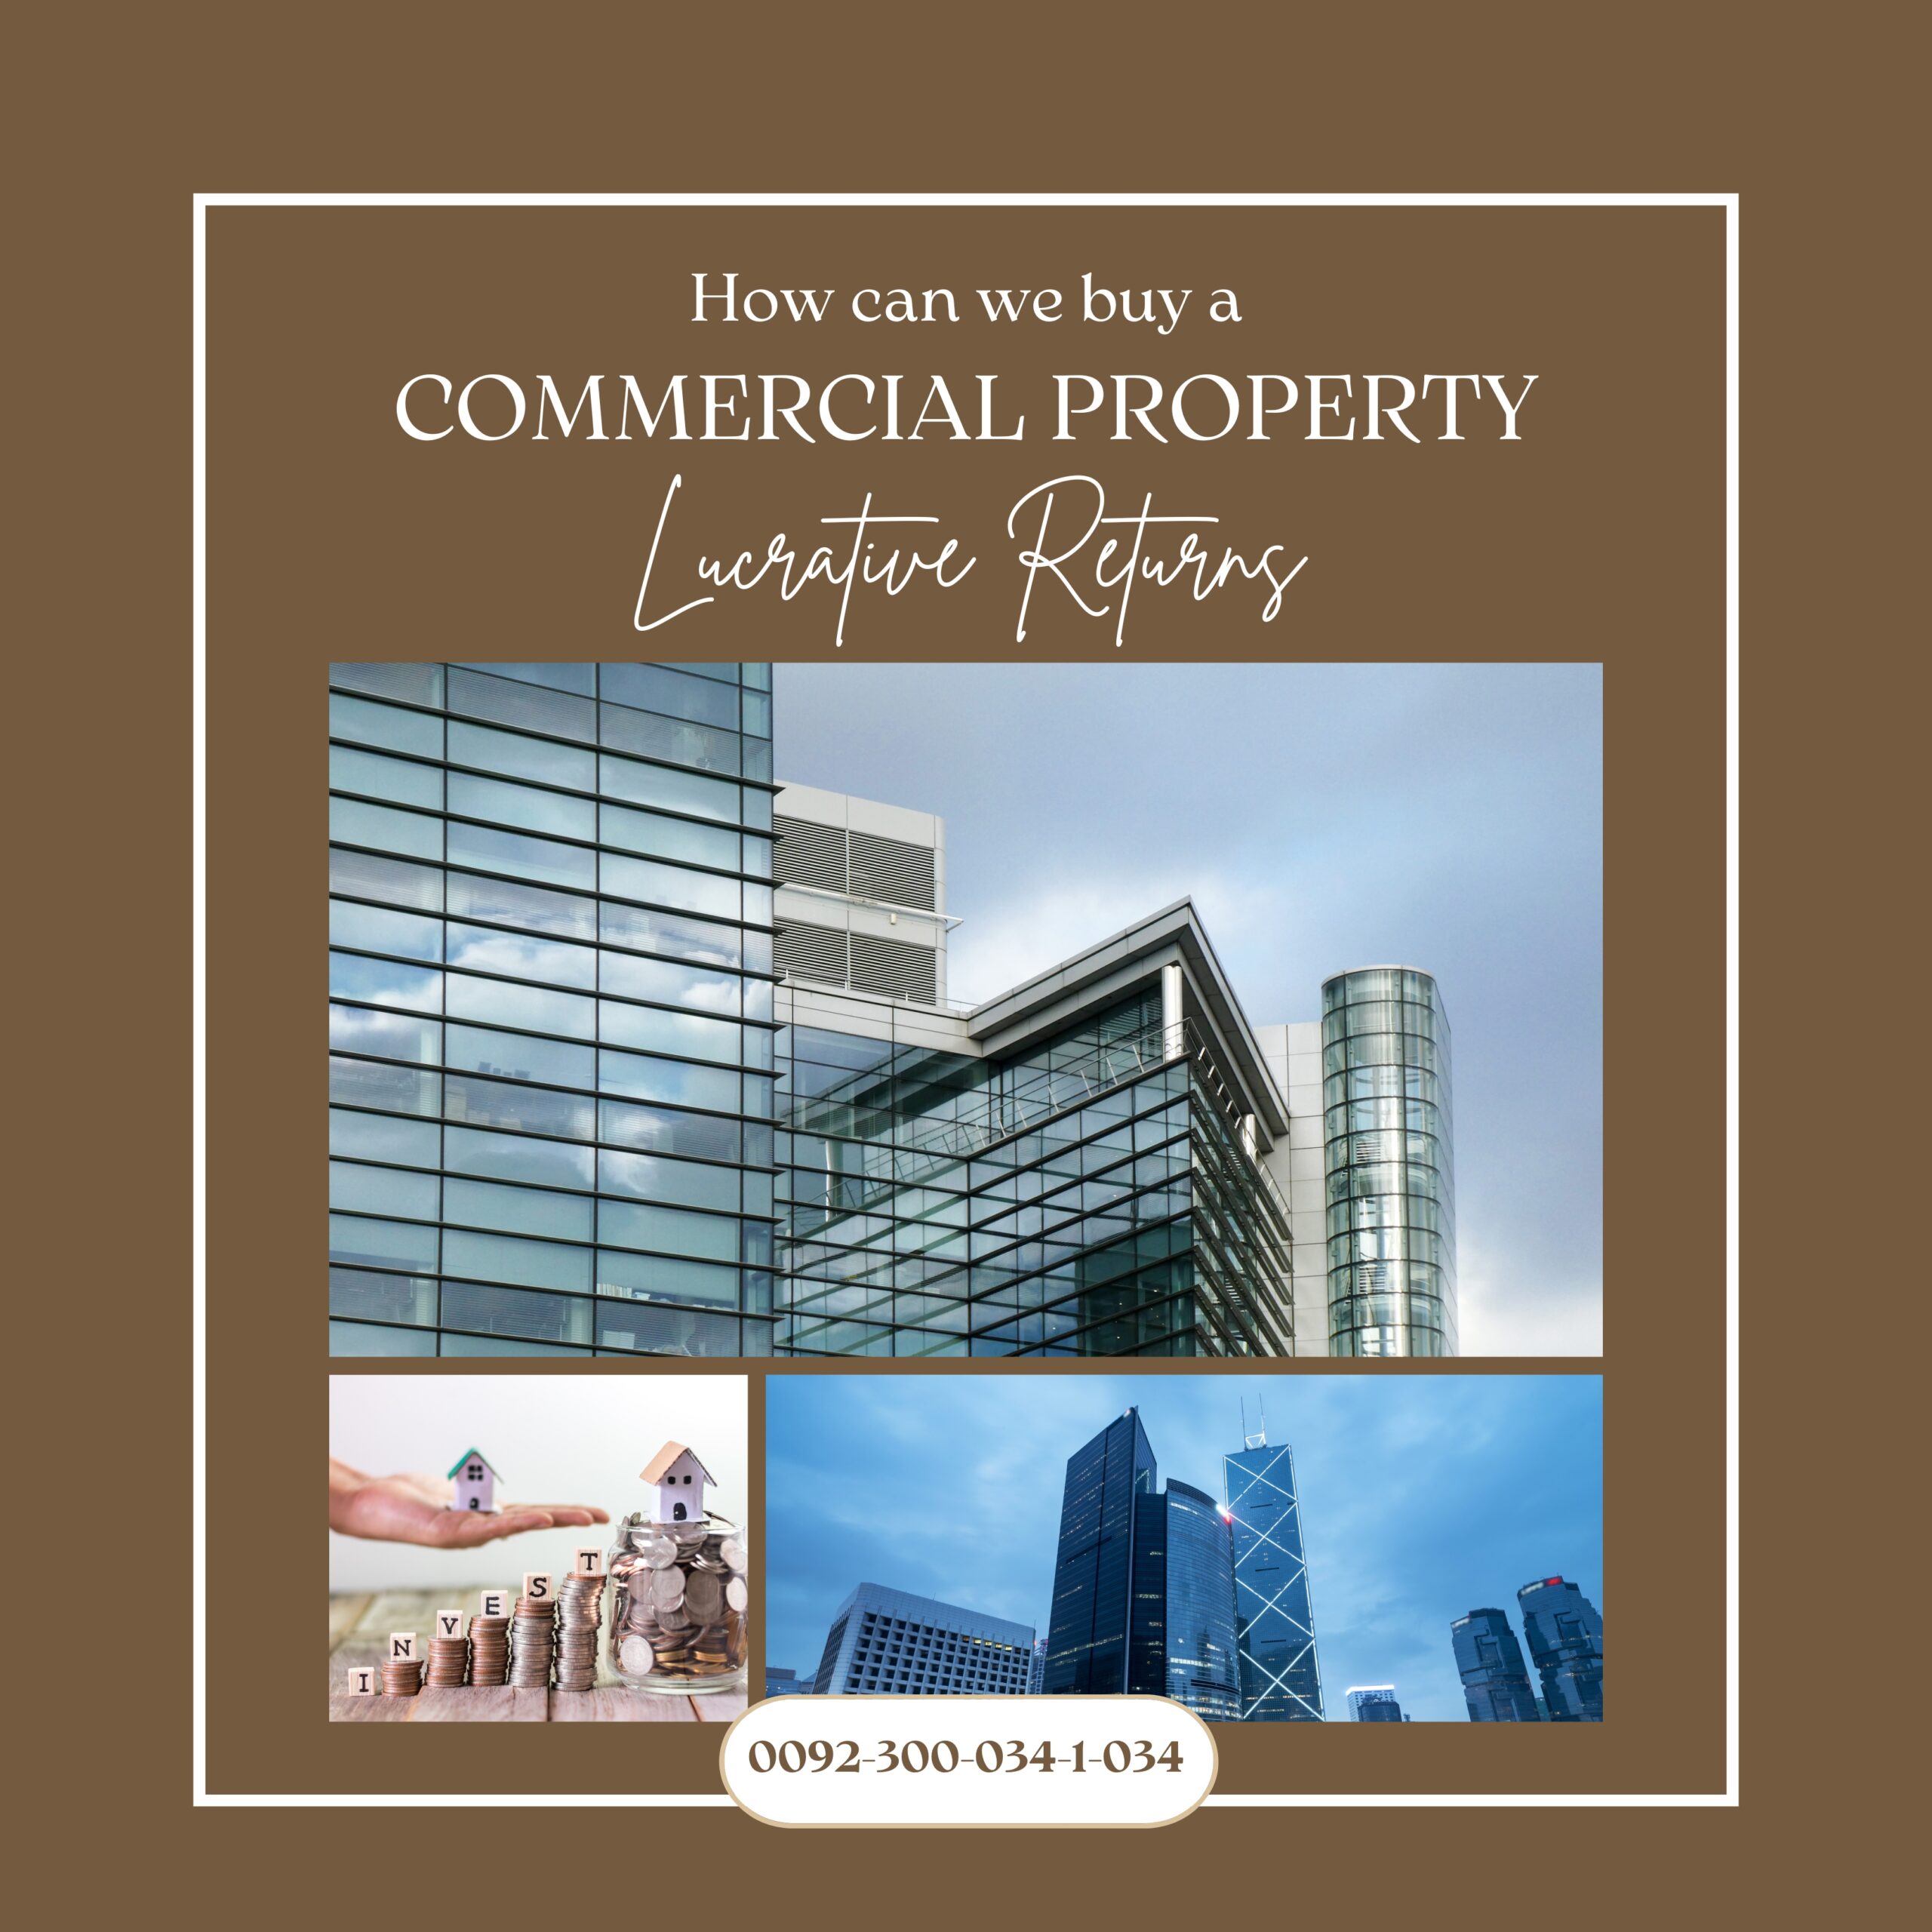 How can we buy a commercial property that may offer lucrative returns? 